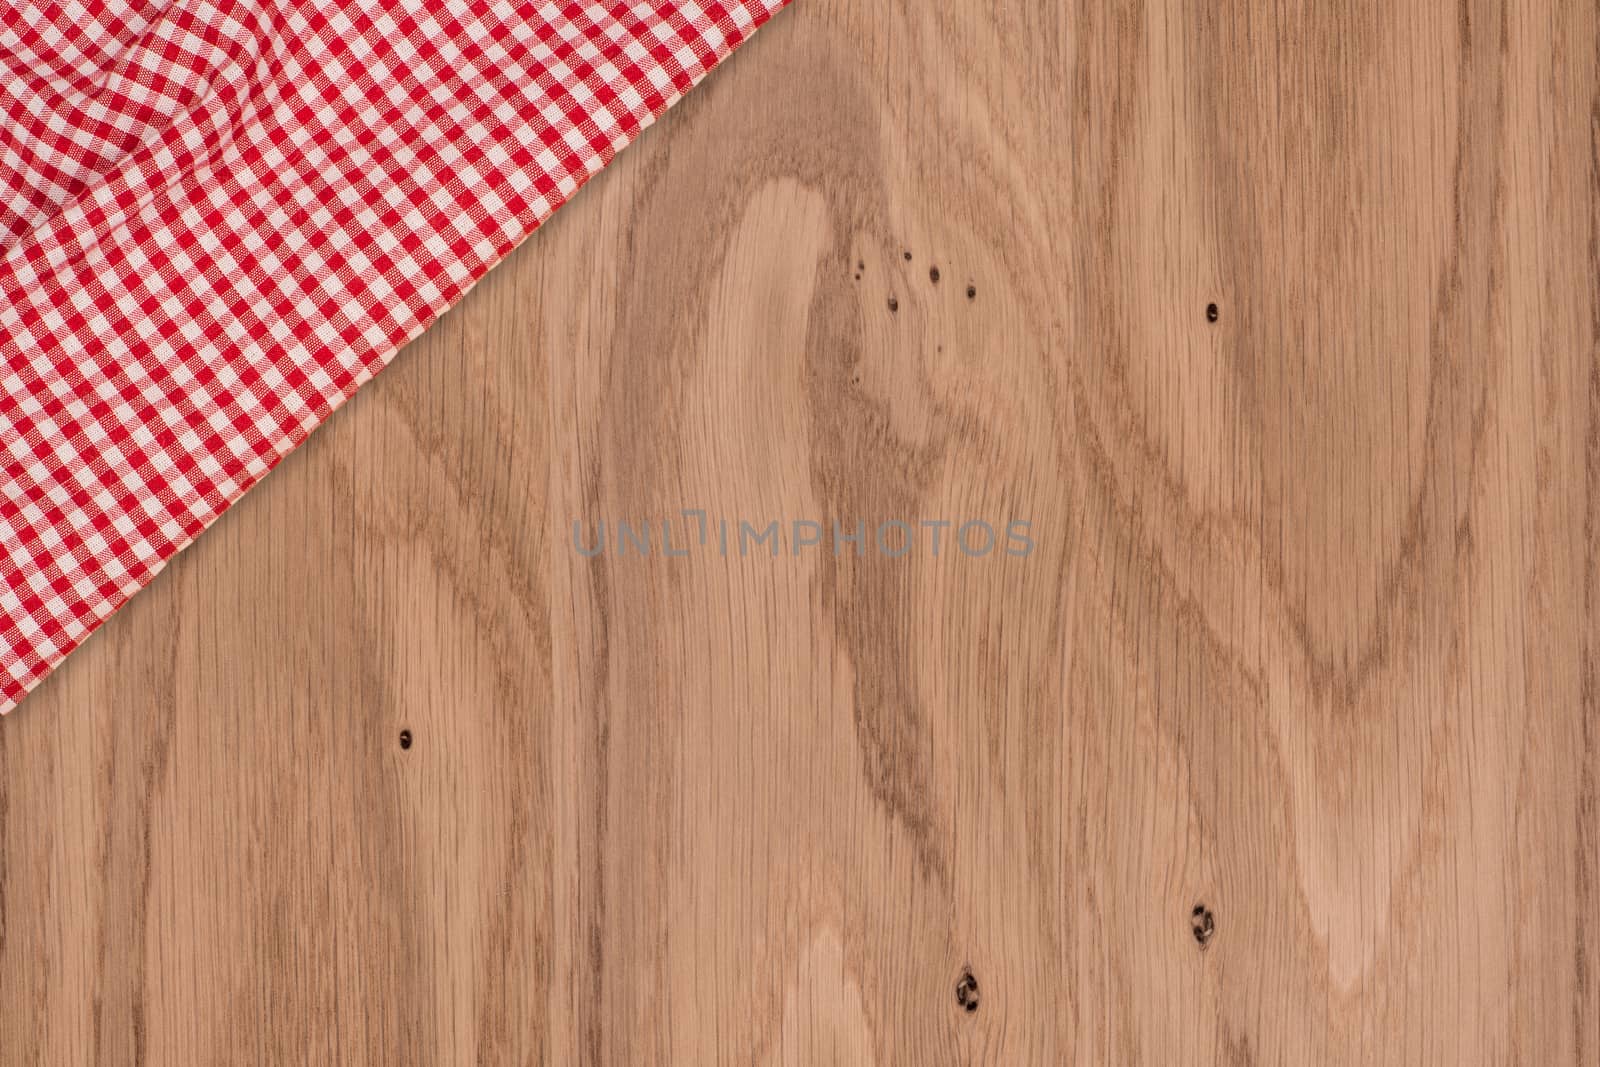 Background with wooden tabletop and checked tablecloth